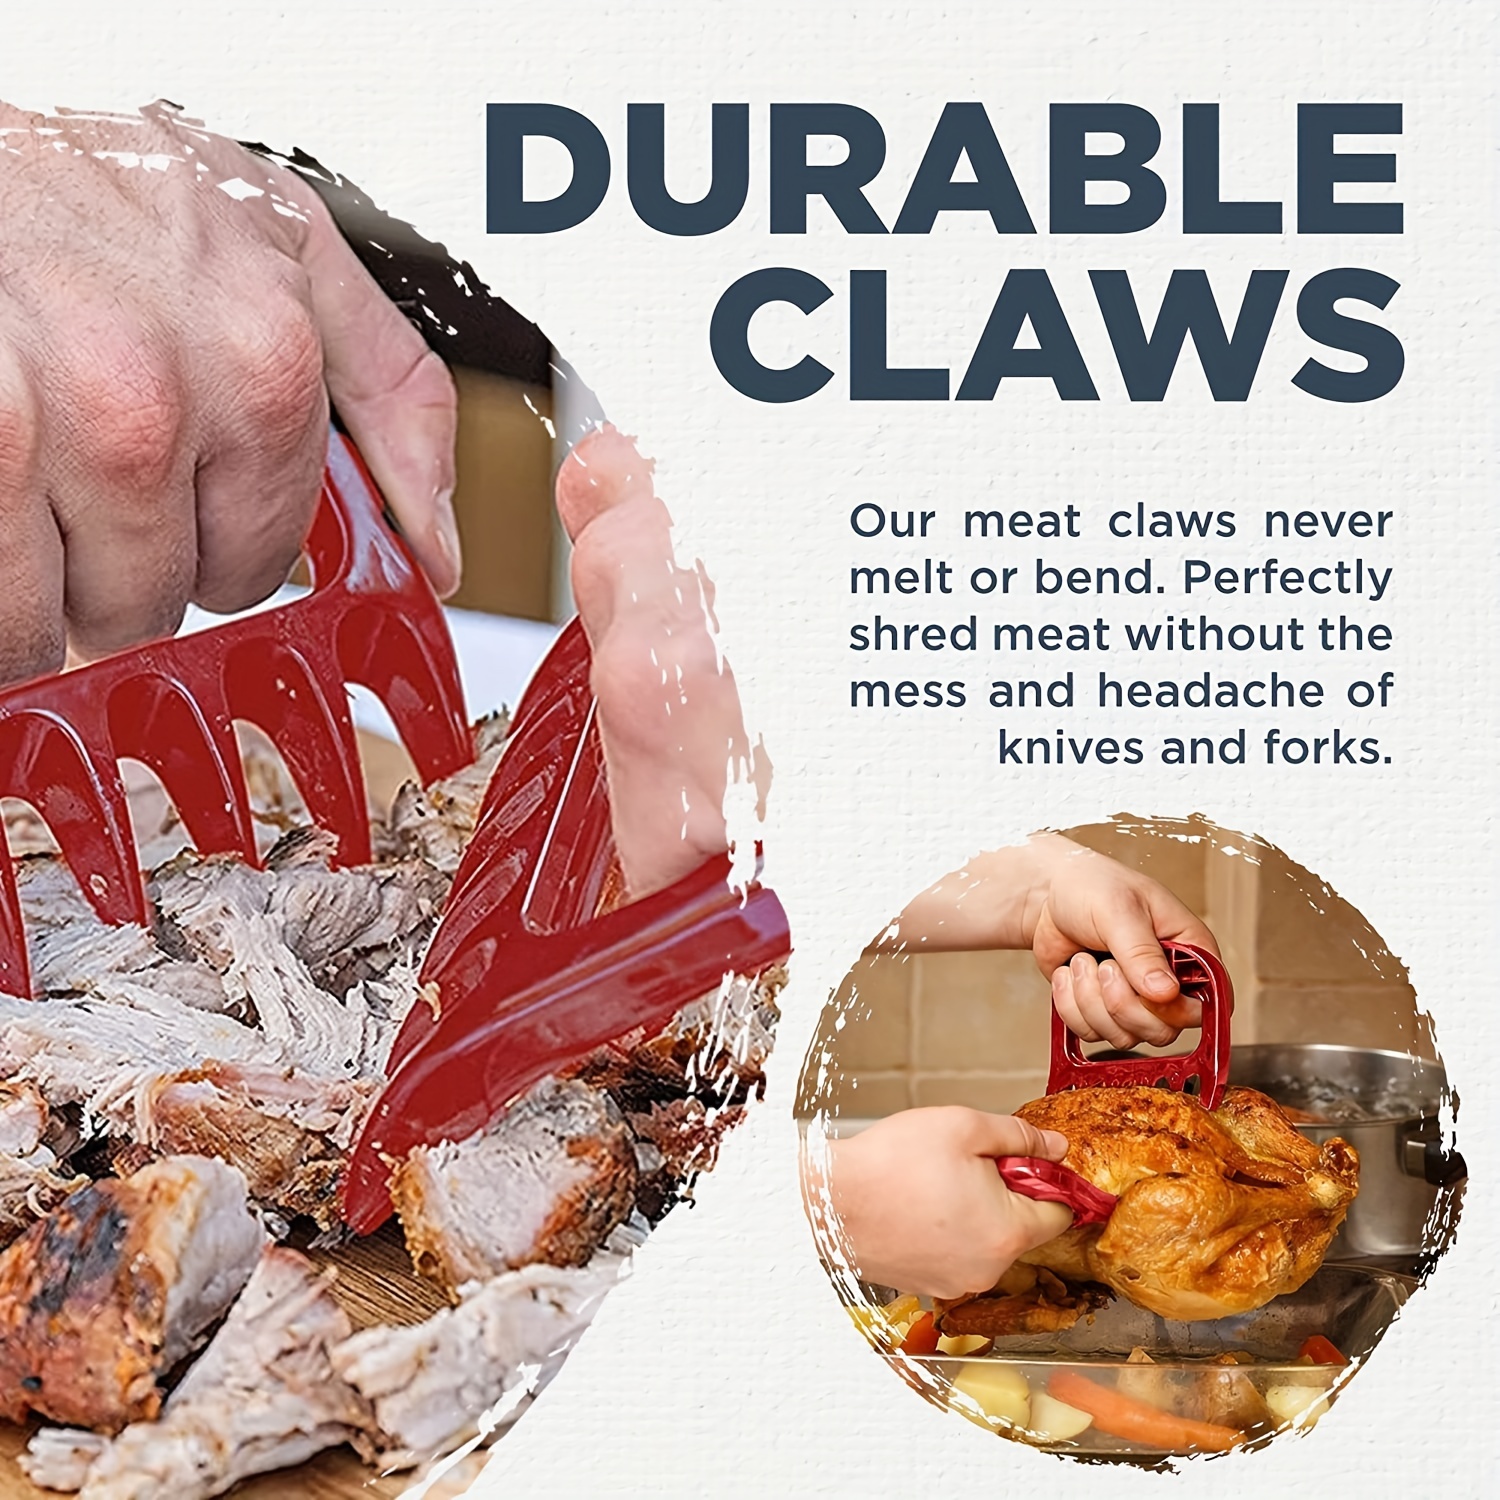 Metal Meat Shredder Claws - GDHH1357 - IdeaStage Promotional Products